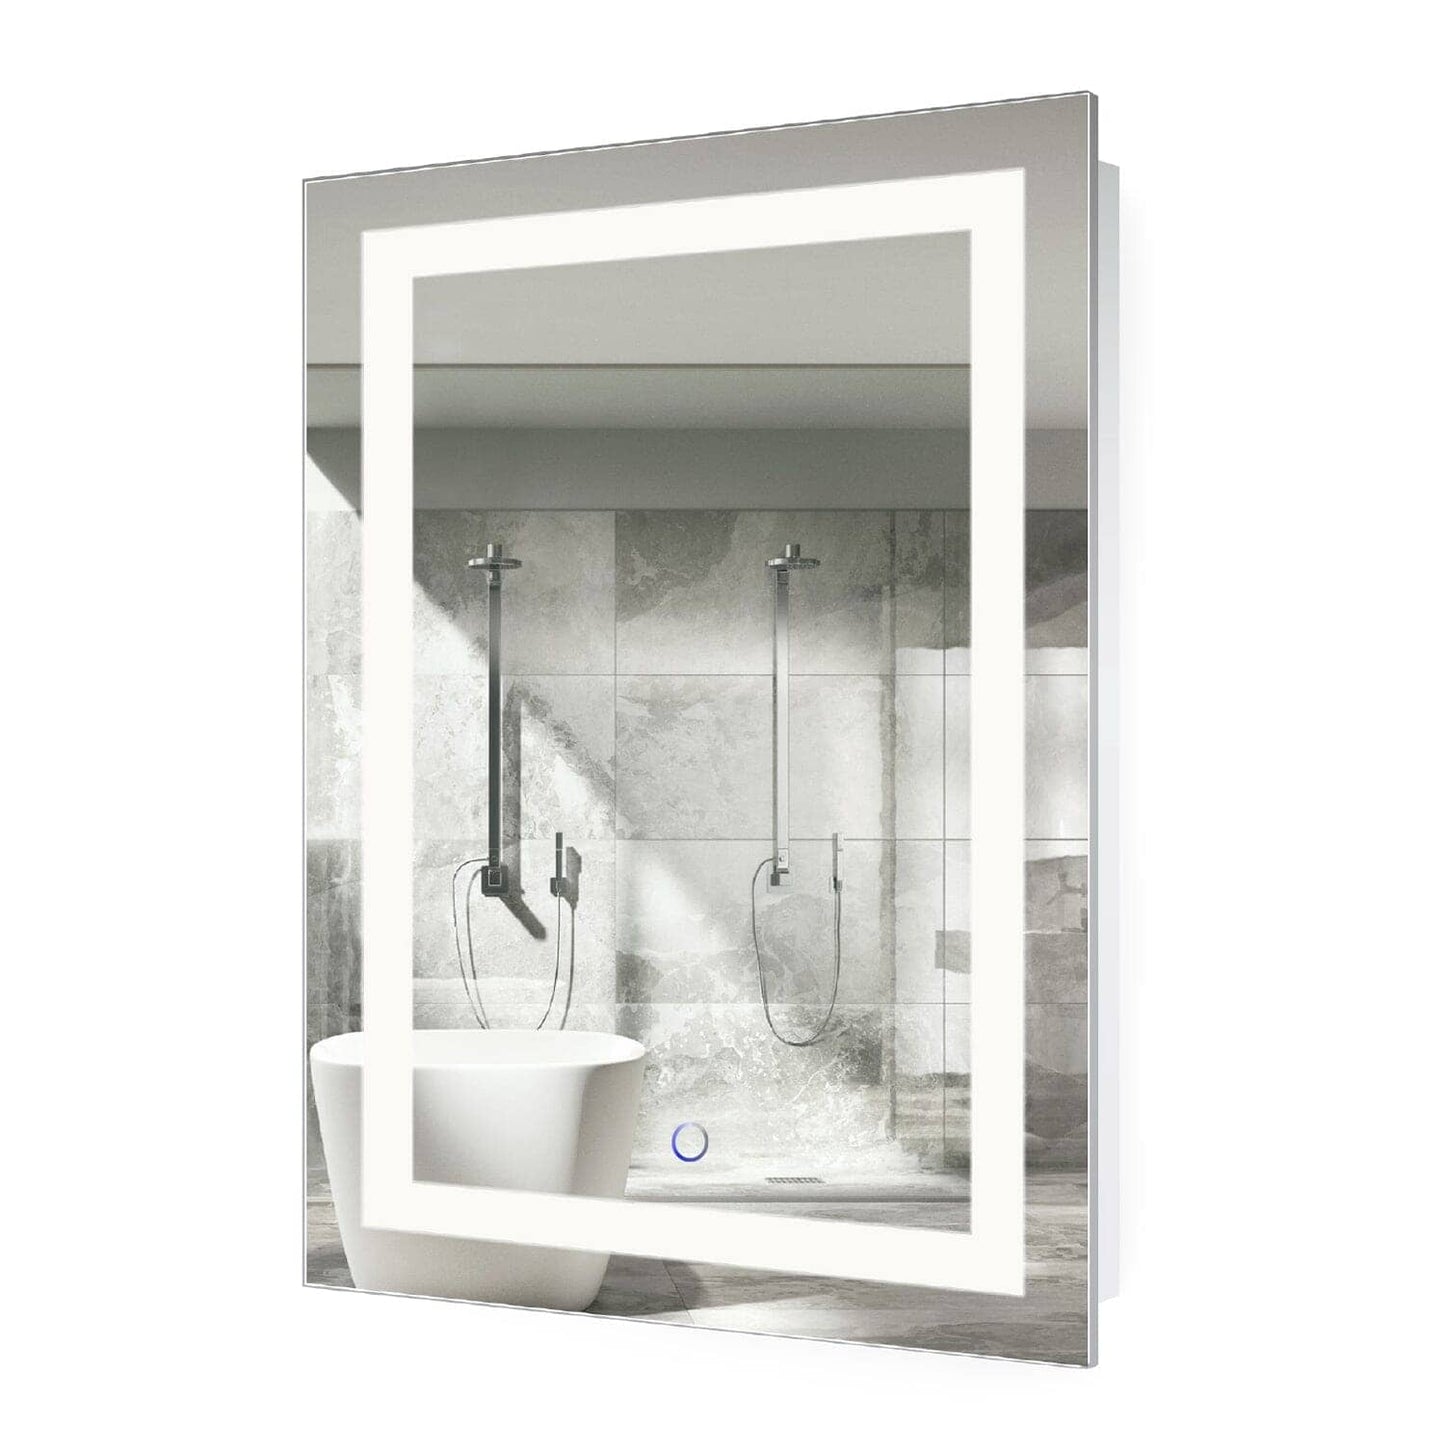 Krugg Icon 2436 Lighted Vanity Mirror with defogger and dimmer with a white backgroud